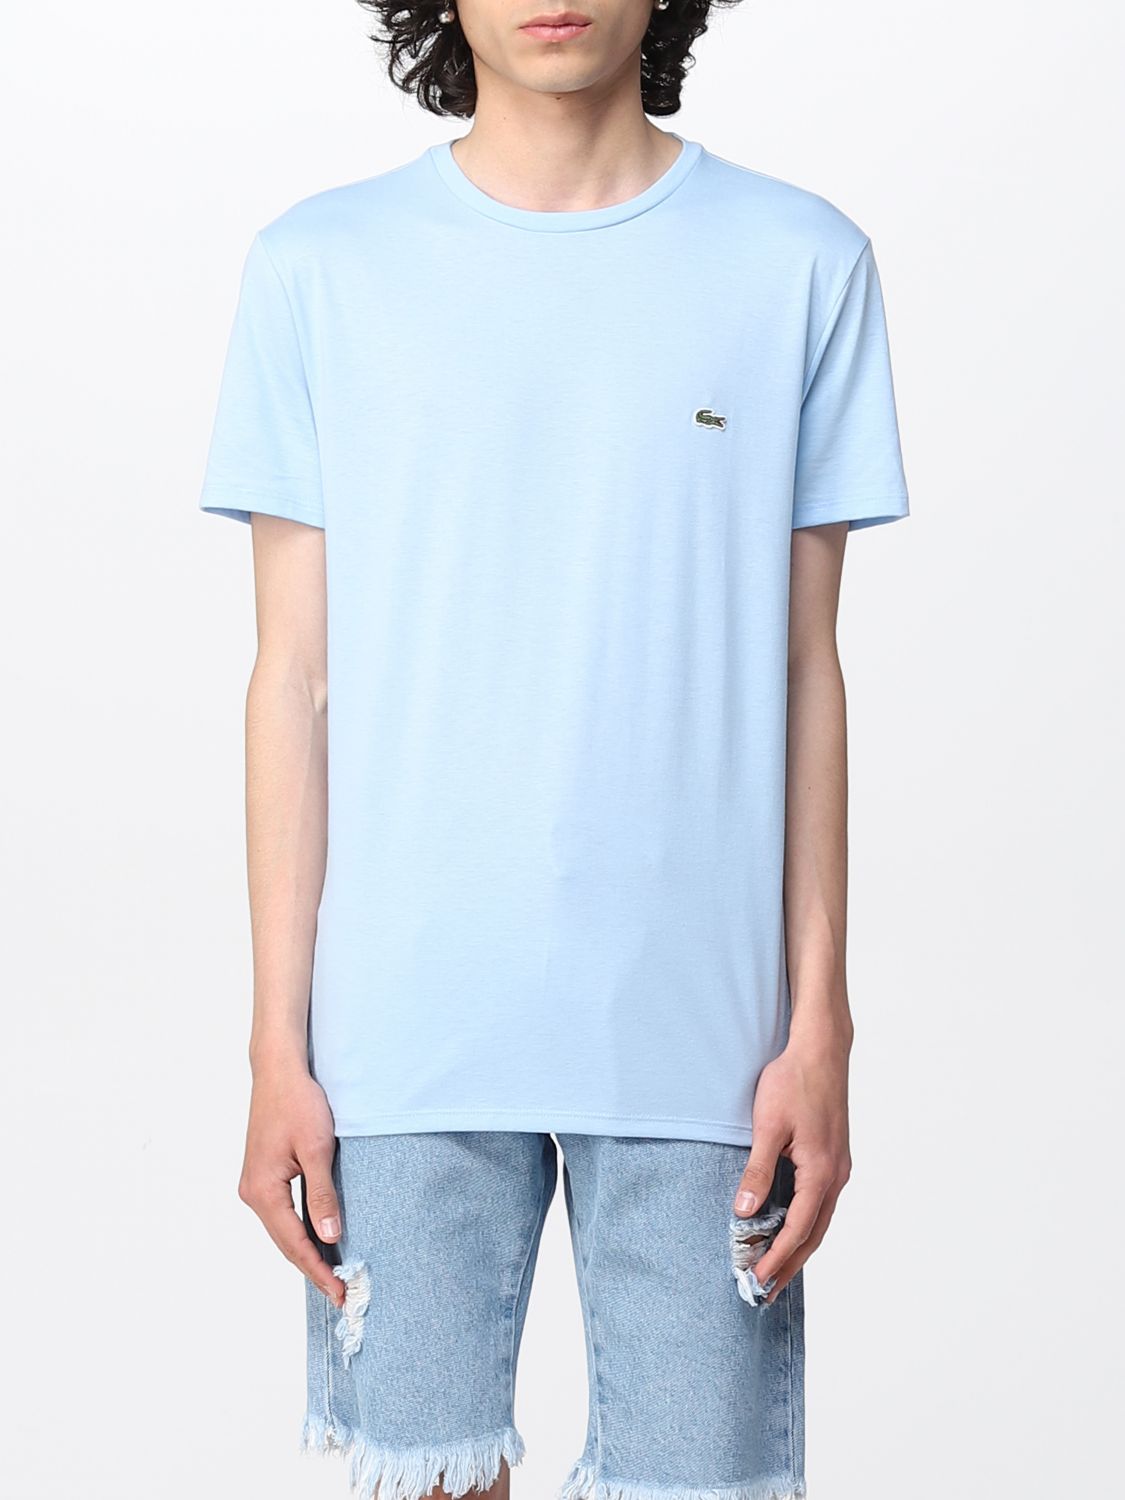 Lacoste Outlet: t-shirt for - Sky Lacoste t-shirt TH6709 online GIGLIO.COM